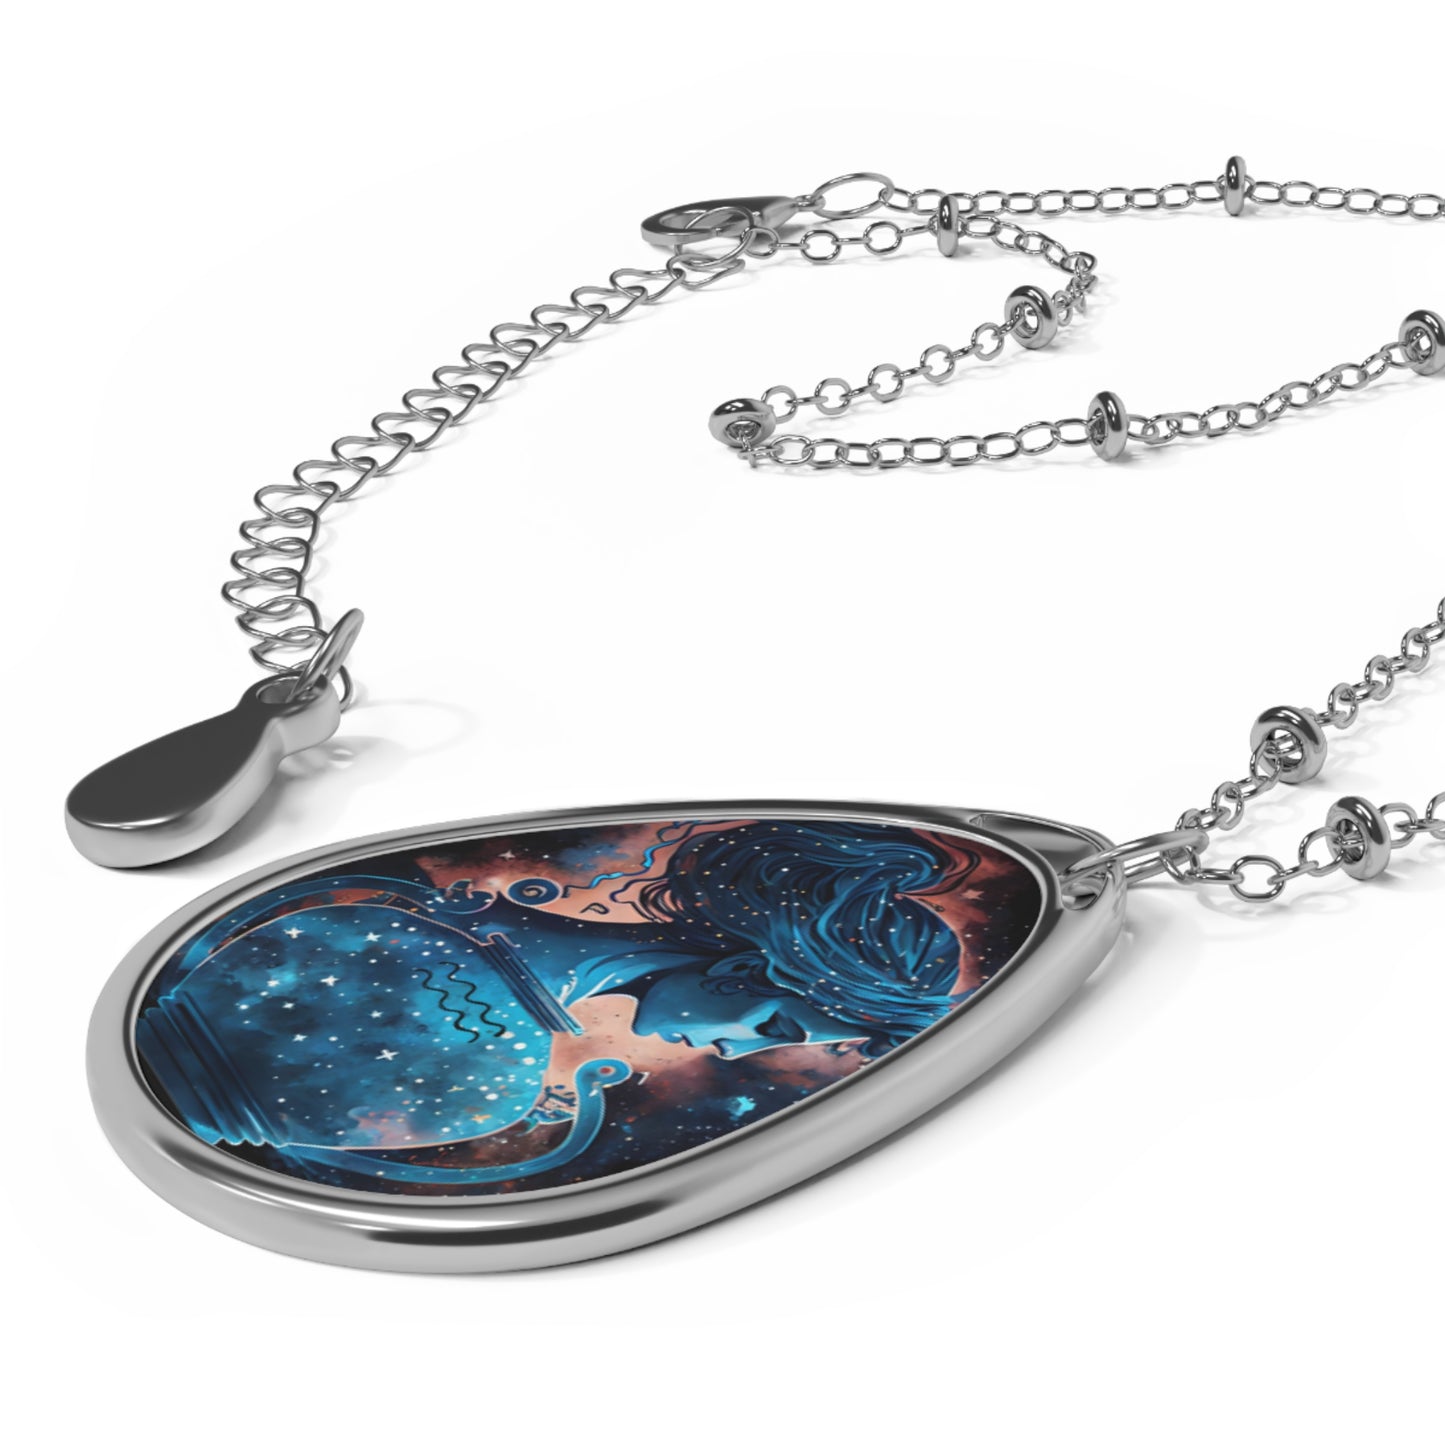 Aquarius Zodiac Sign ~ Aquarius Goddess in the Stars ~ Necklace & Oval Pendant With Chain